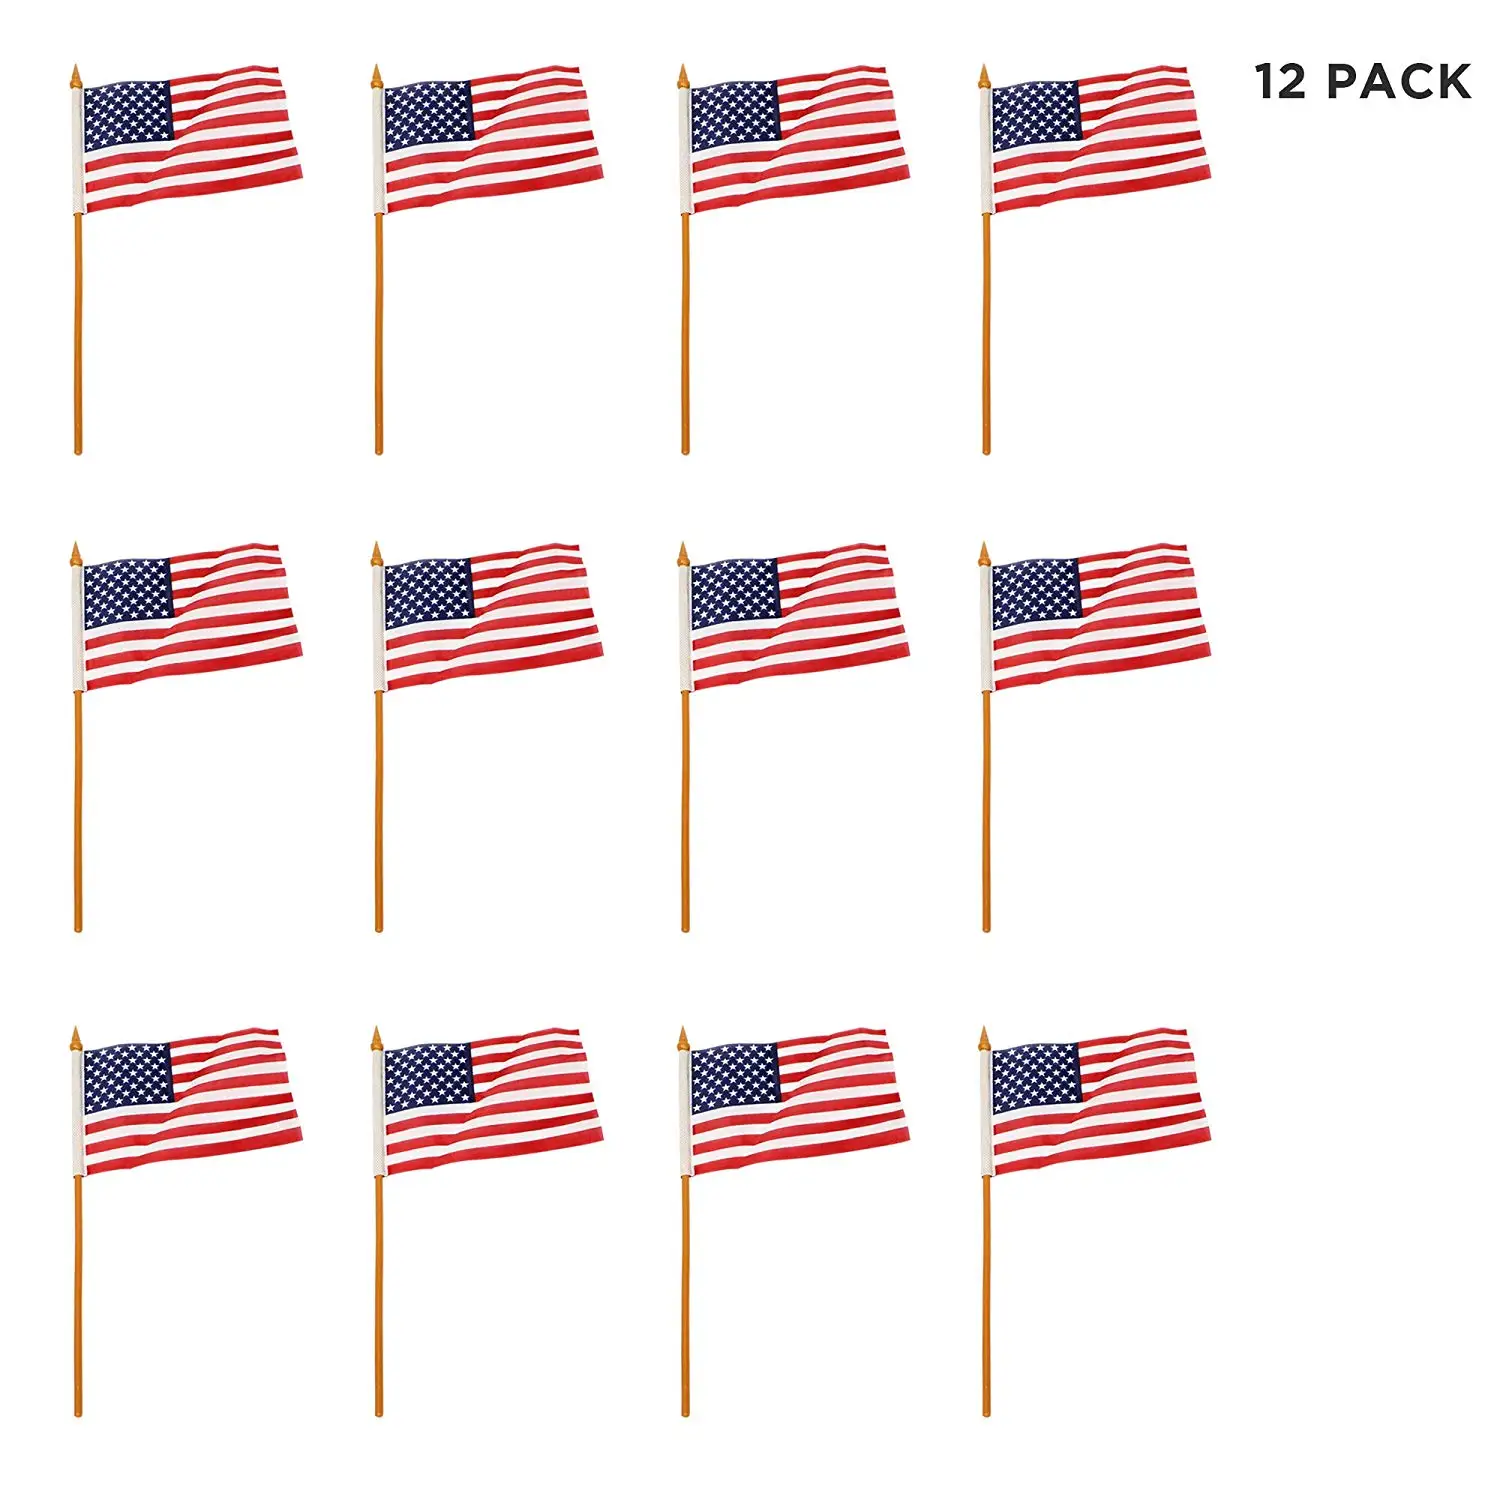 Made in the USA! Box of 12 Gadsden Historical Flag 4x6 Miniature Desk & Table Flags Includes 12 Flag Stands & 12 DONT TREAD ON ME Small Mini Stick Flags 